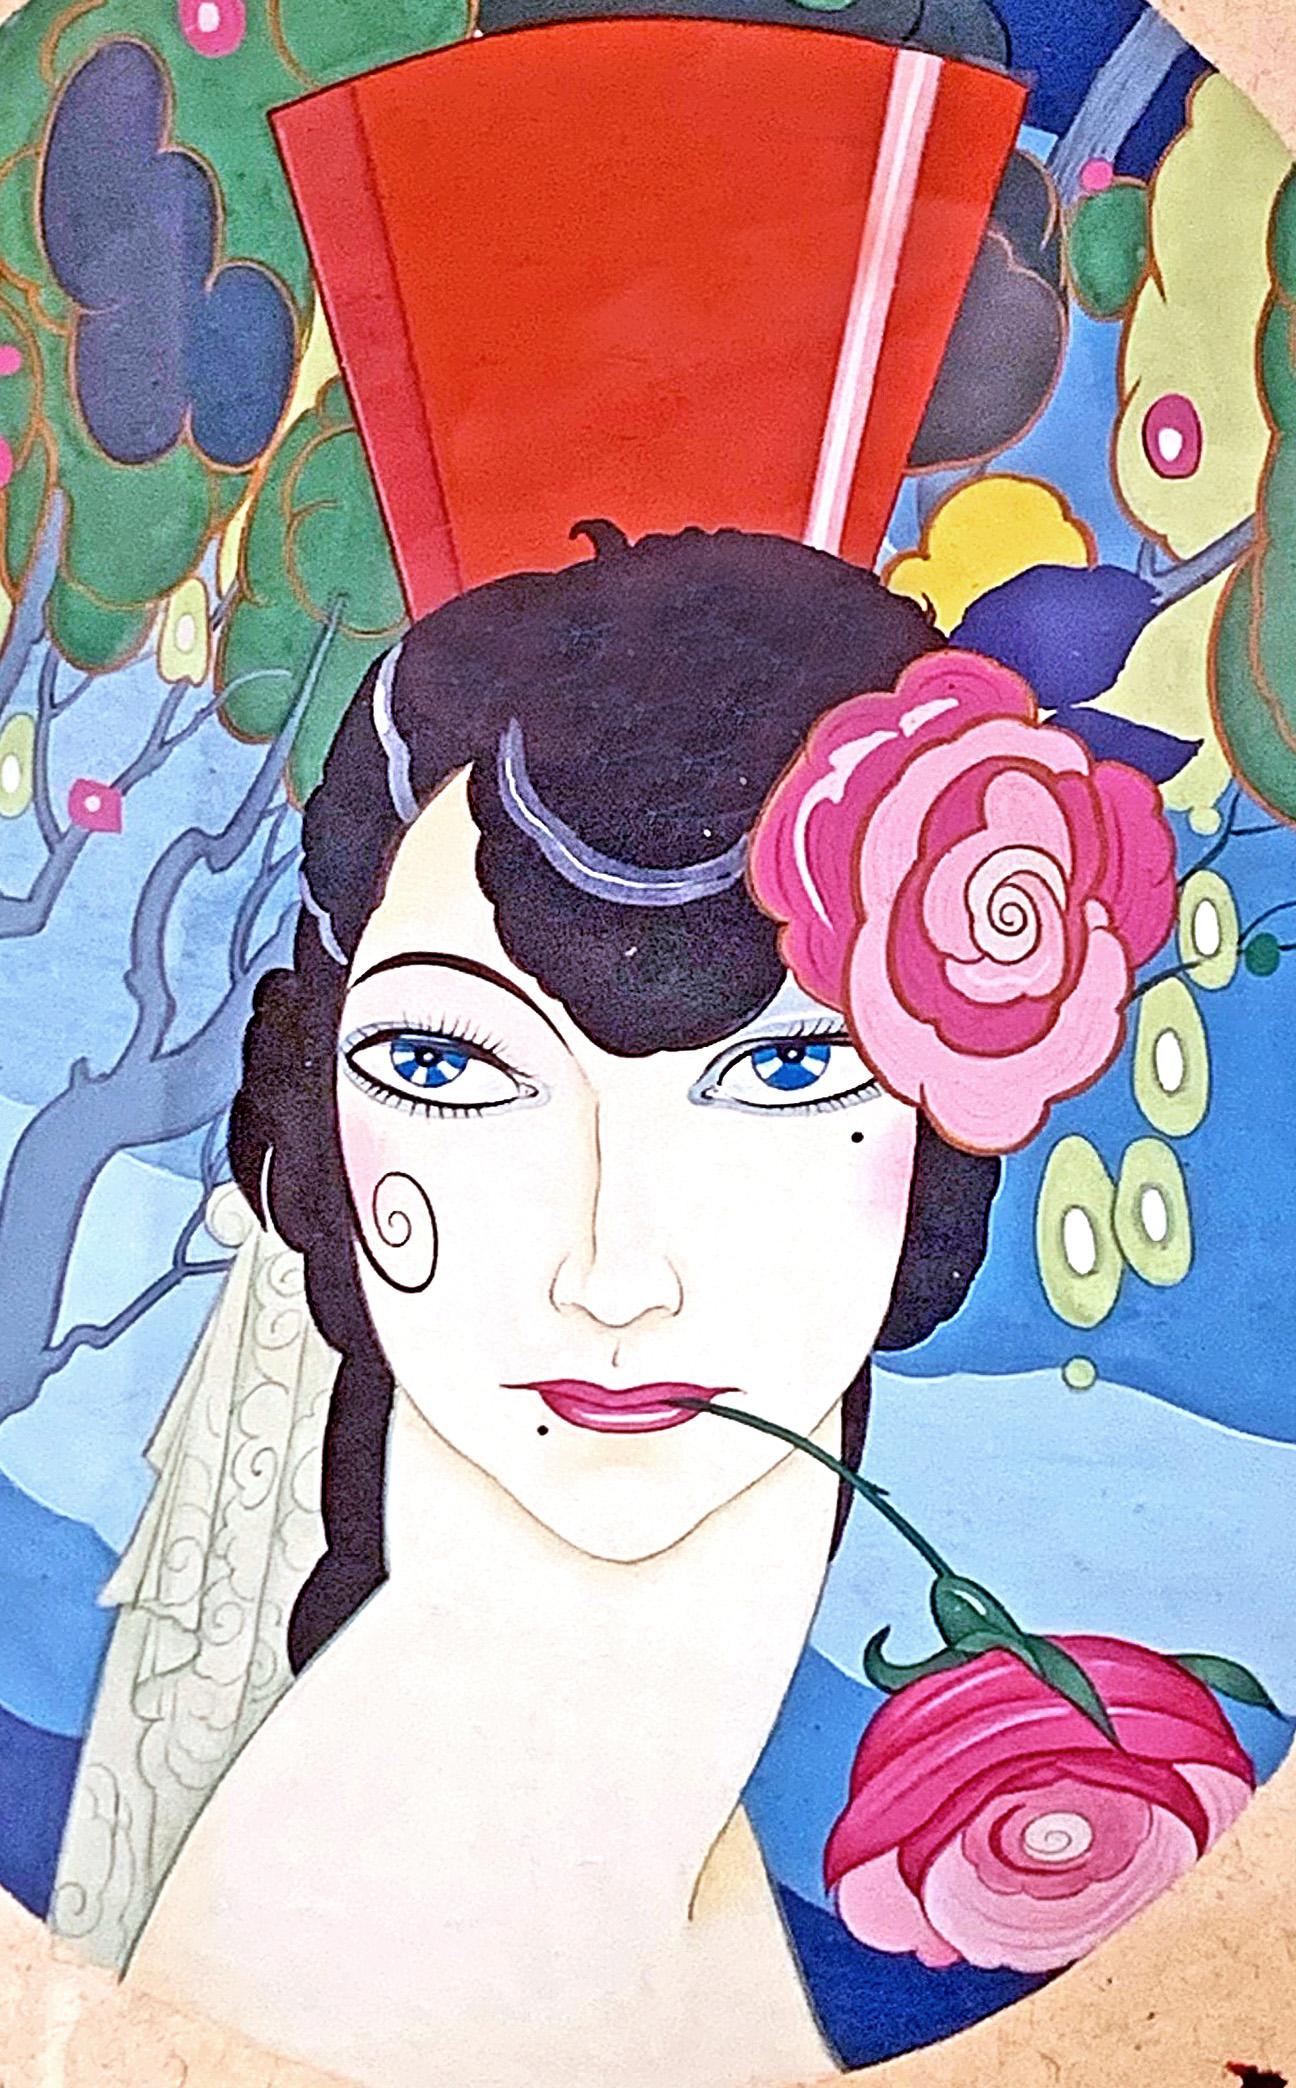 This quintessential Art Deco image, executed in a brilliant palette of Carmen, pale purple, rose and green, depicts a wide-eyed and exotic Spanish woman with bright red hair ornament and a rose clenched in her mouth. Surrounding her is a lush Art